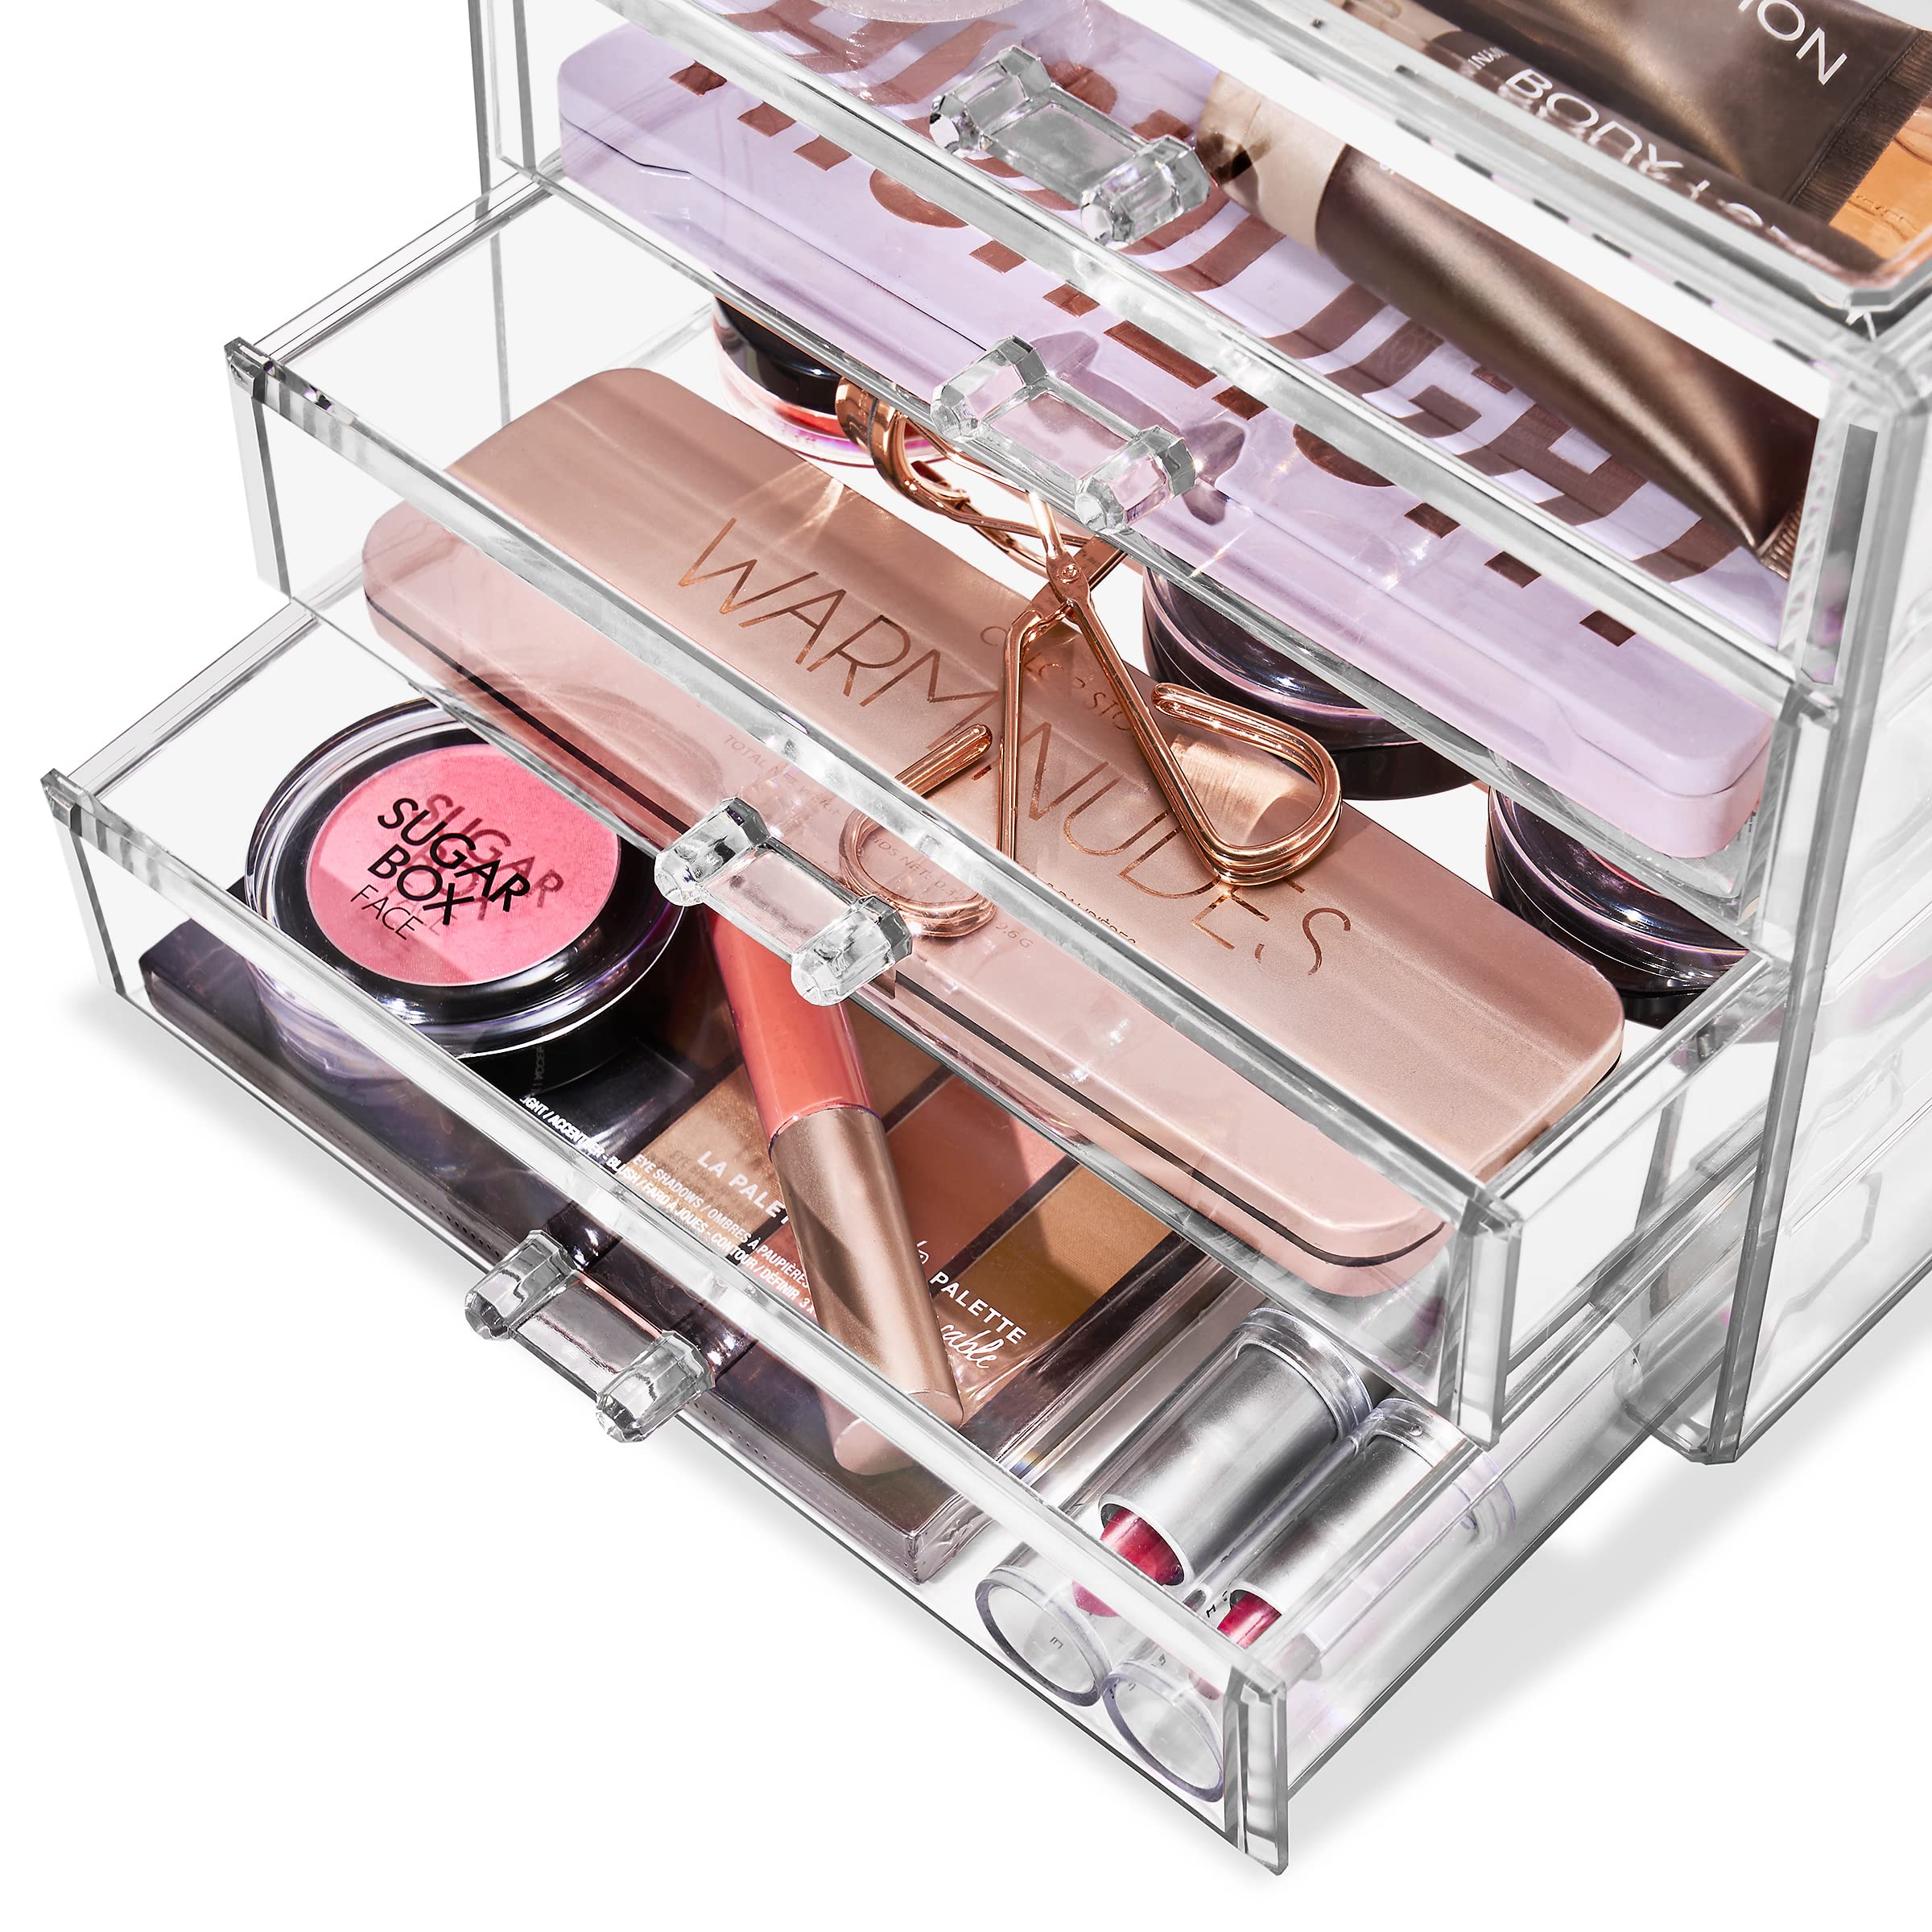 Sorbus Makeup Organizer - 4 Drawer Acrylic Make Up Organizers and Storage for Cosmetics, Jewelry, Beauty Supplies, Clear Makeup Organizer for Vanity, Girl's Room, College Dorm, Counter, Bathroom Sink